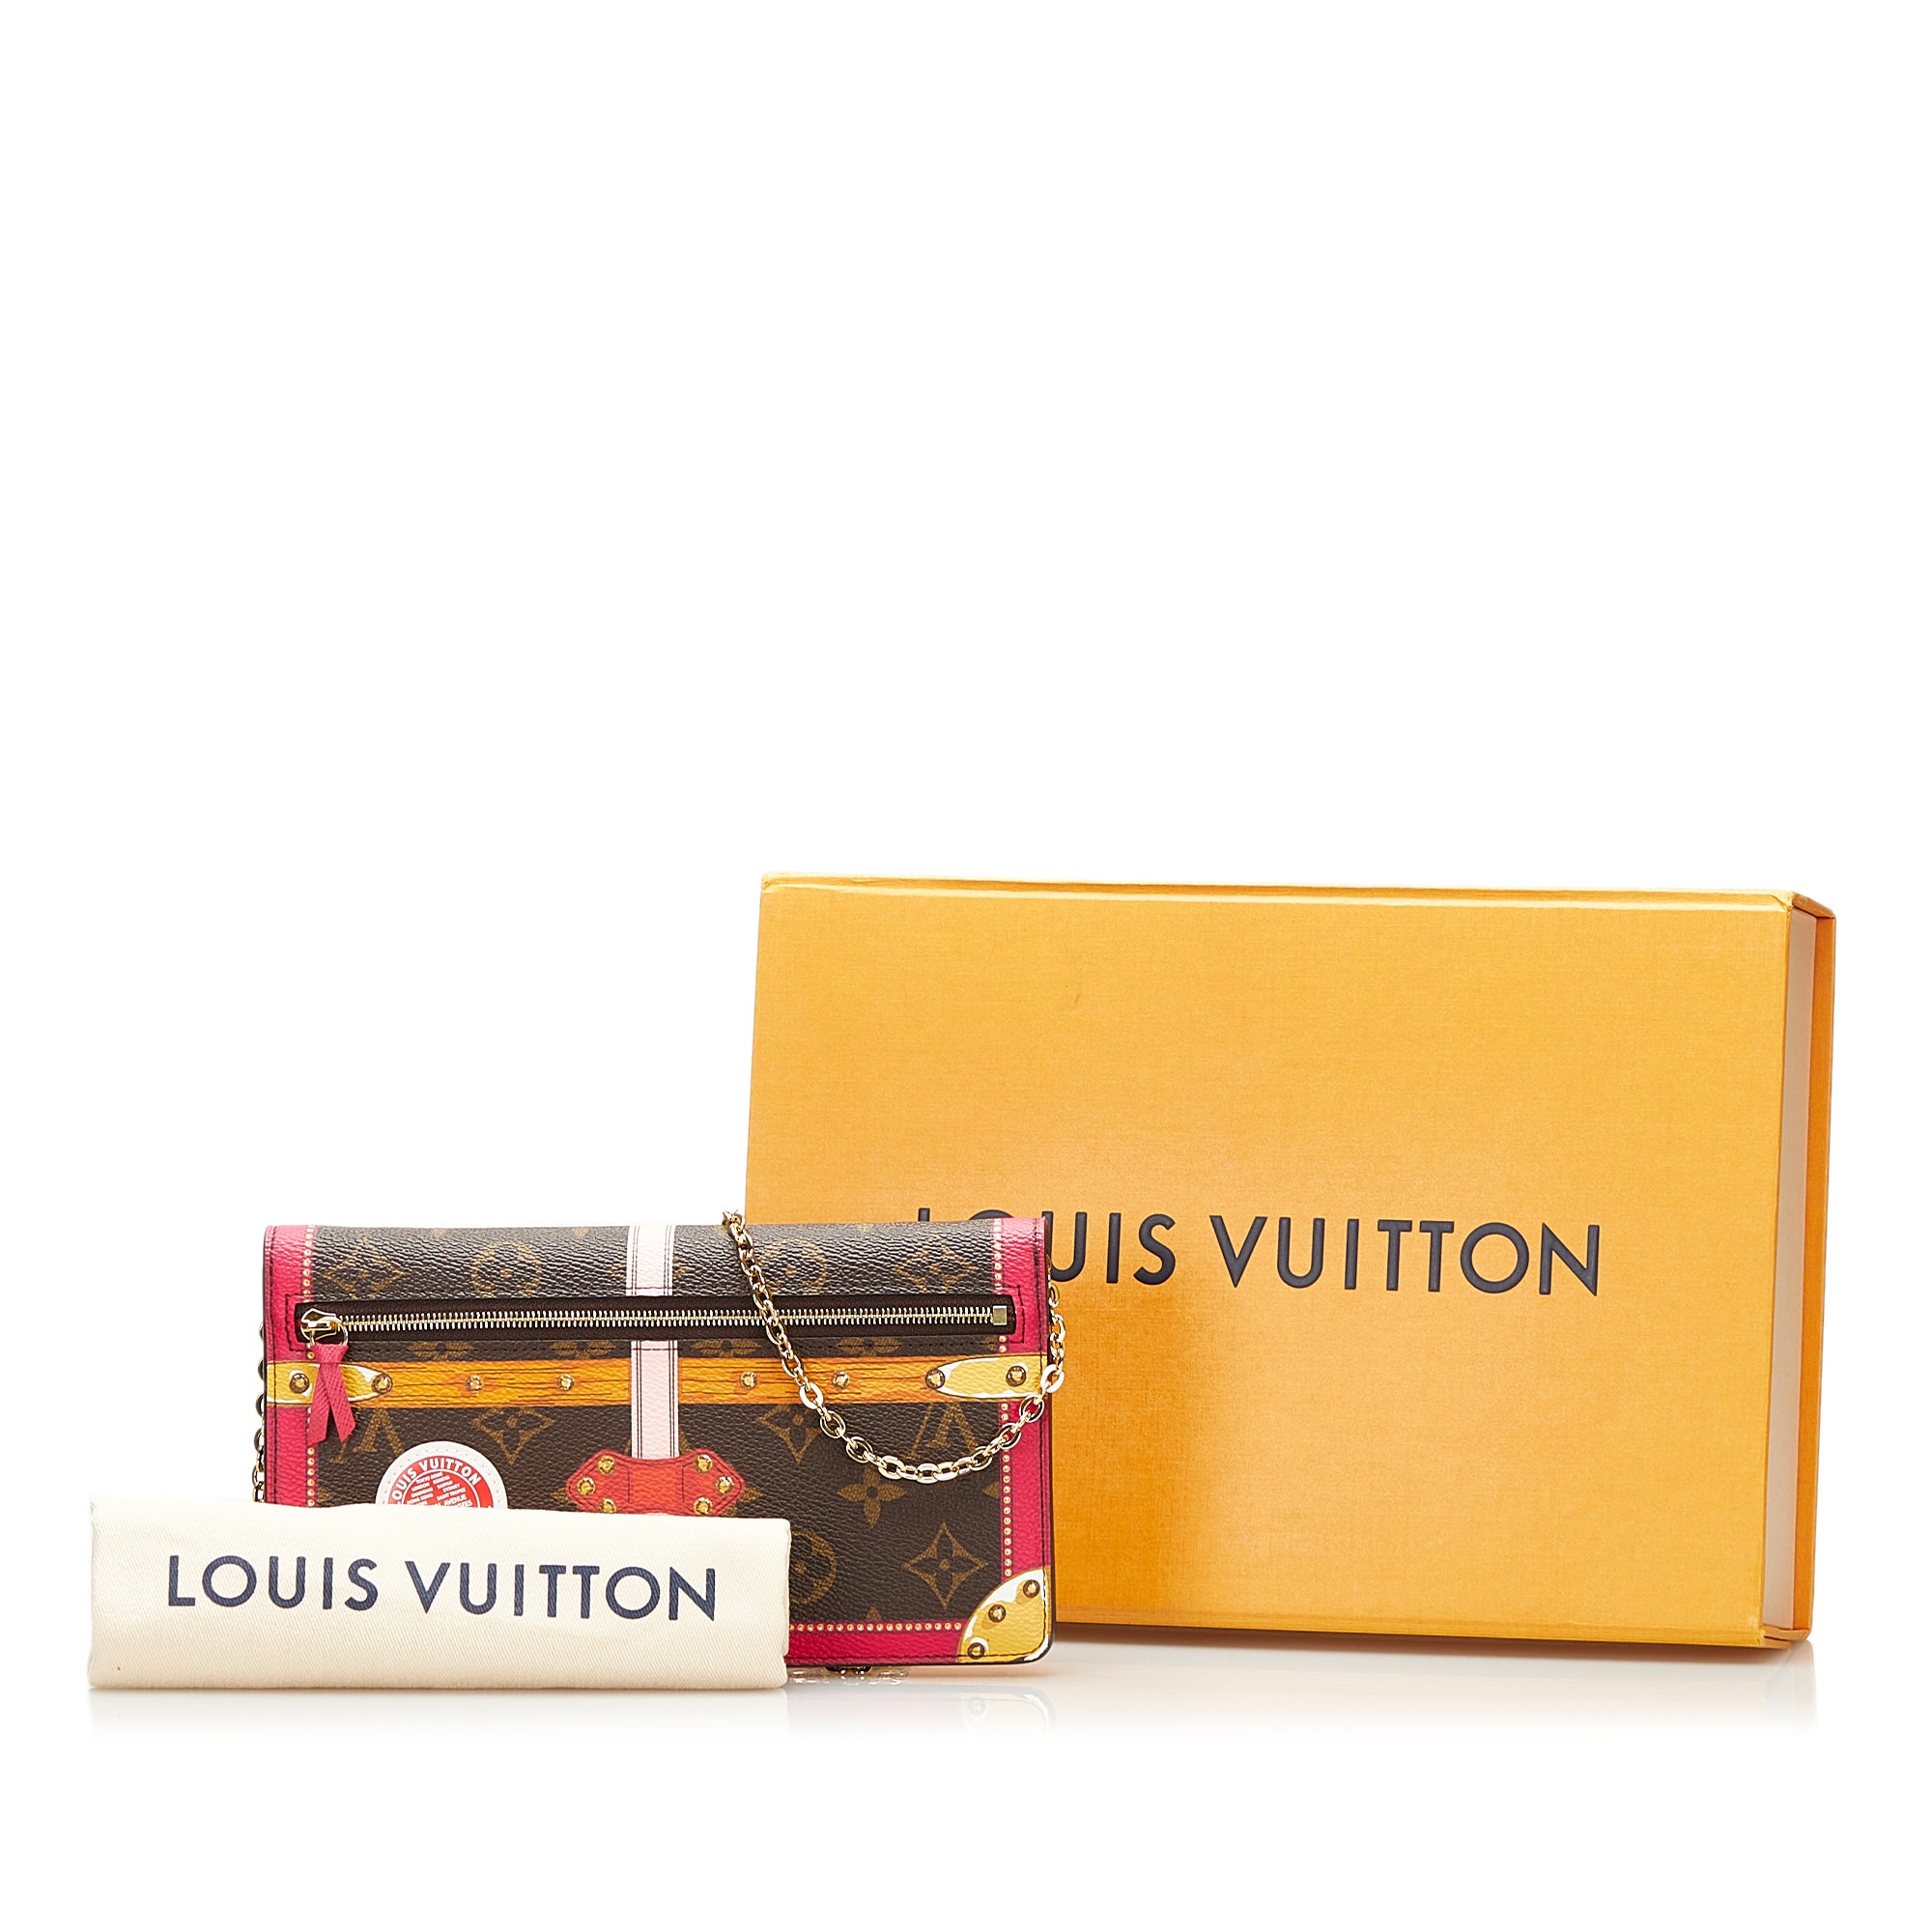 Louis Vuitton Holiday 2018 Packaging